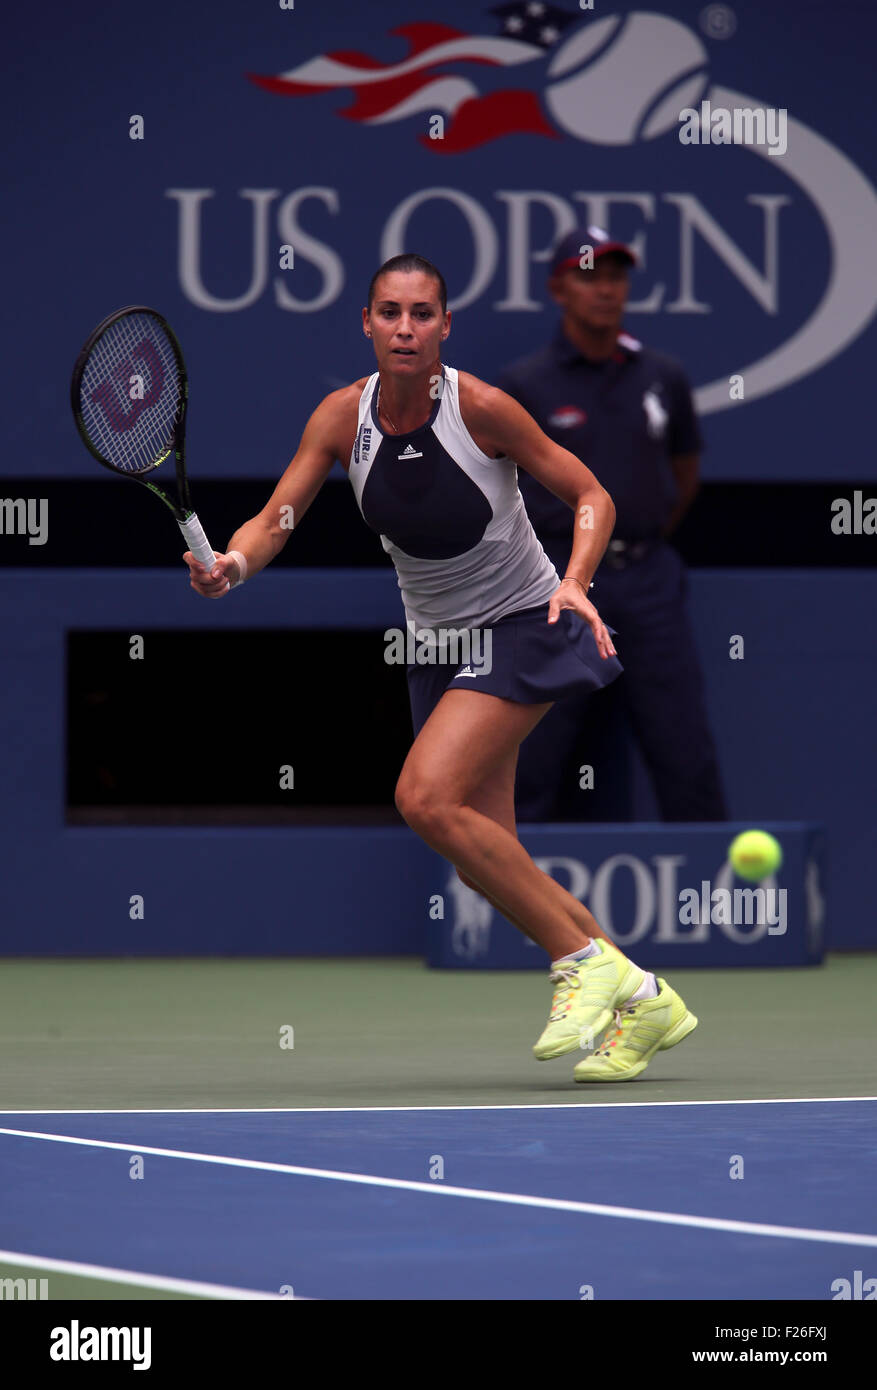 New York, USA. 12th Sep, 2015. Flavia Penetta of Italy returns a shot to countrywoman Roberta Vinci during the women's final of the U.S. Open at Flushing Meadows, New York on the afternoon of September 12th, 2015.  Pennetta won the match 7-6 (7-4), 6-2 Credit:  Adam Stoltman/Alamy Live News Stock Photo